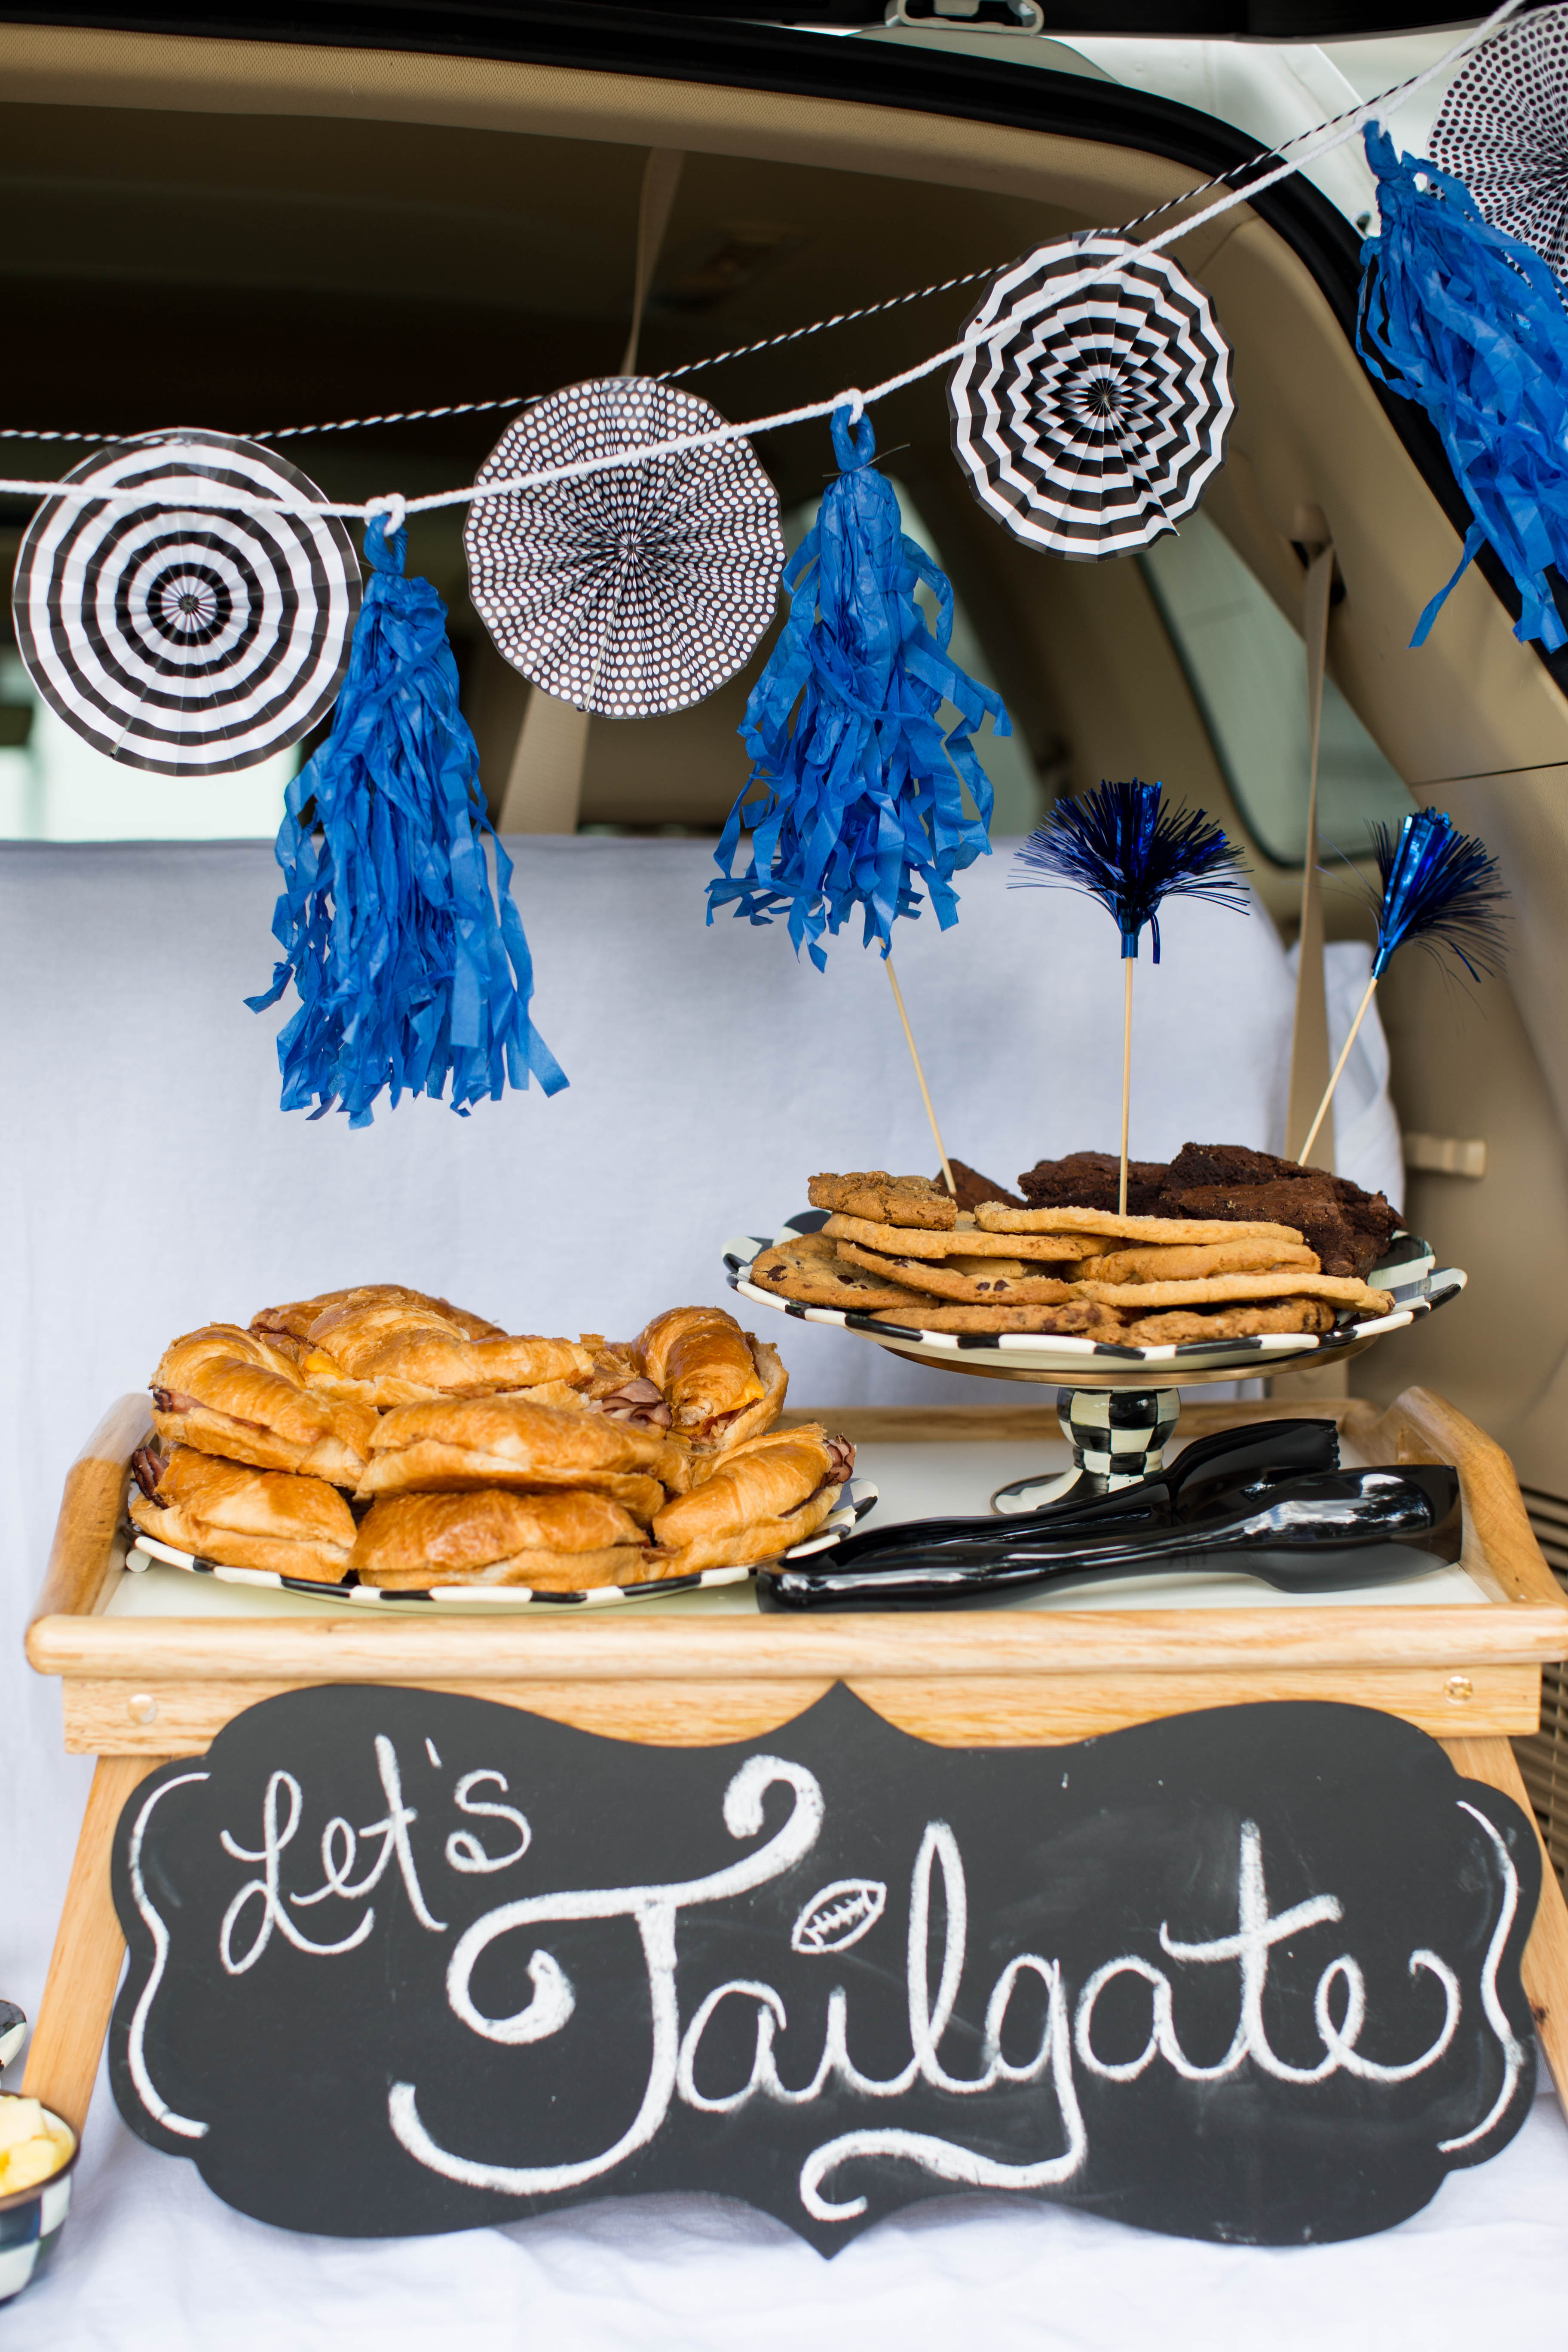 How to: Host a Great Tailgate Party by North Carolina lifestyle blogger Coffee Beans and Bobby Pins